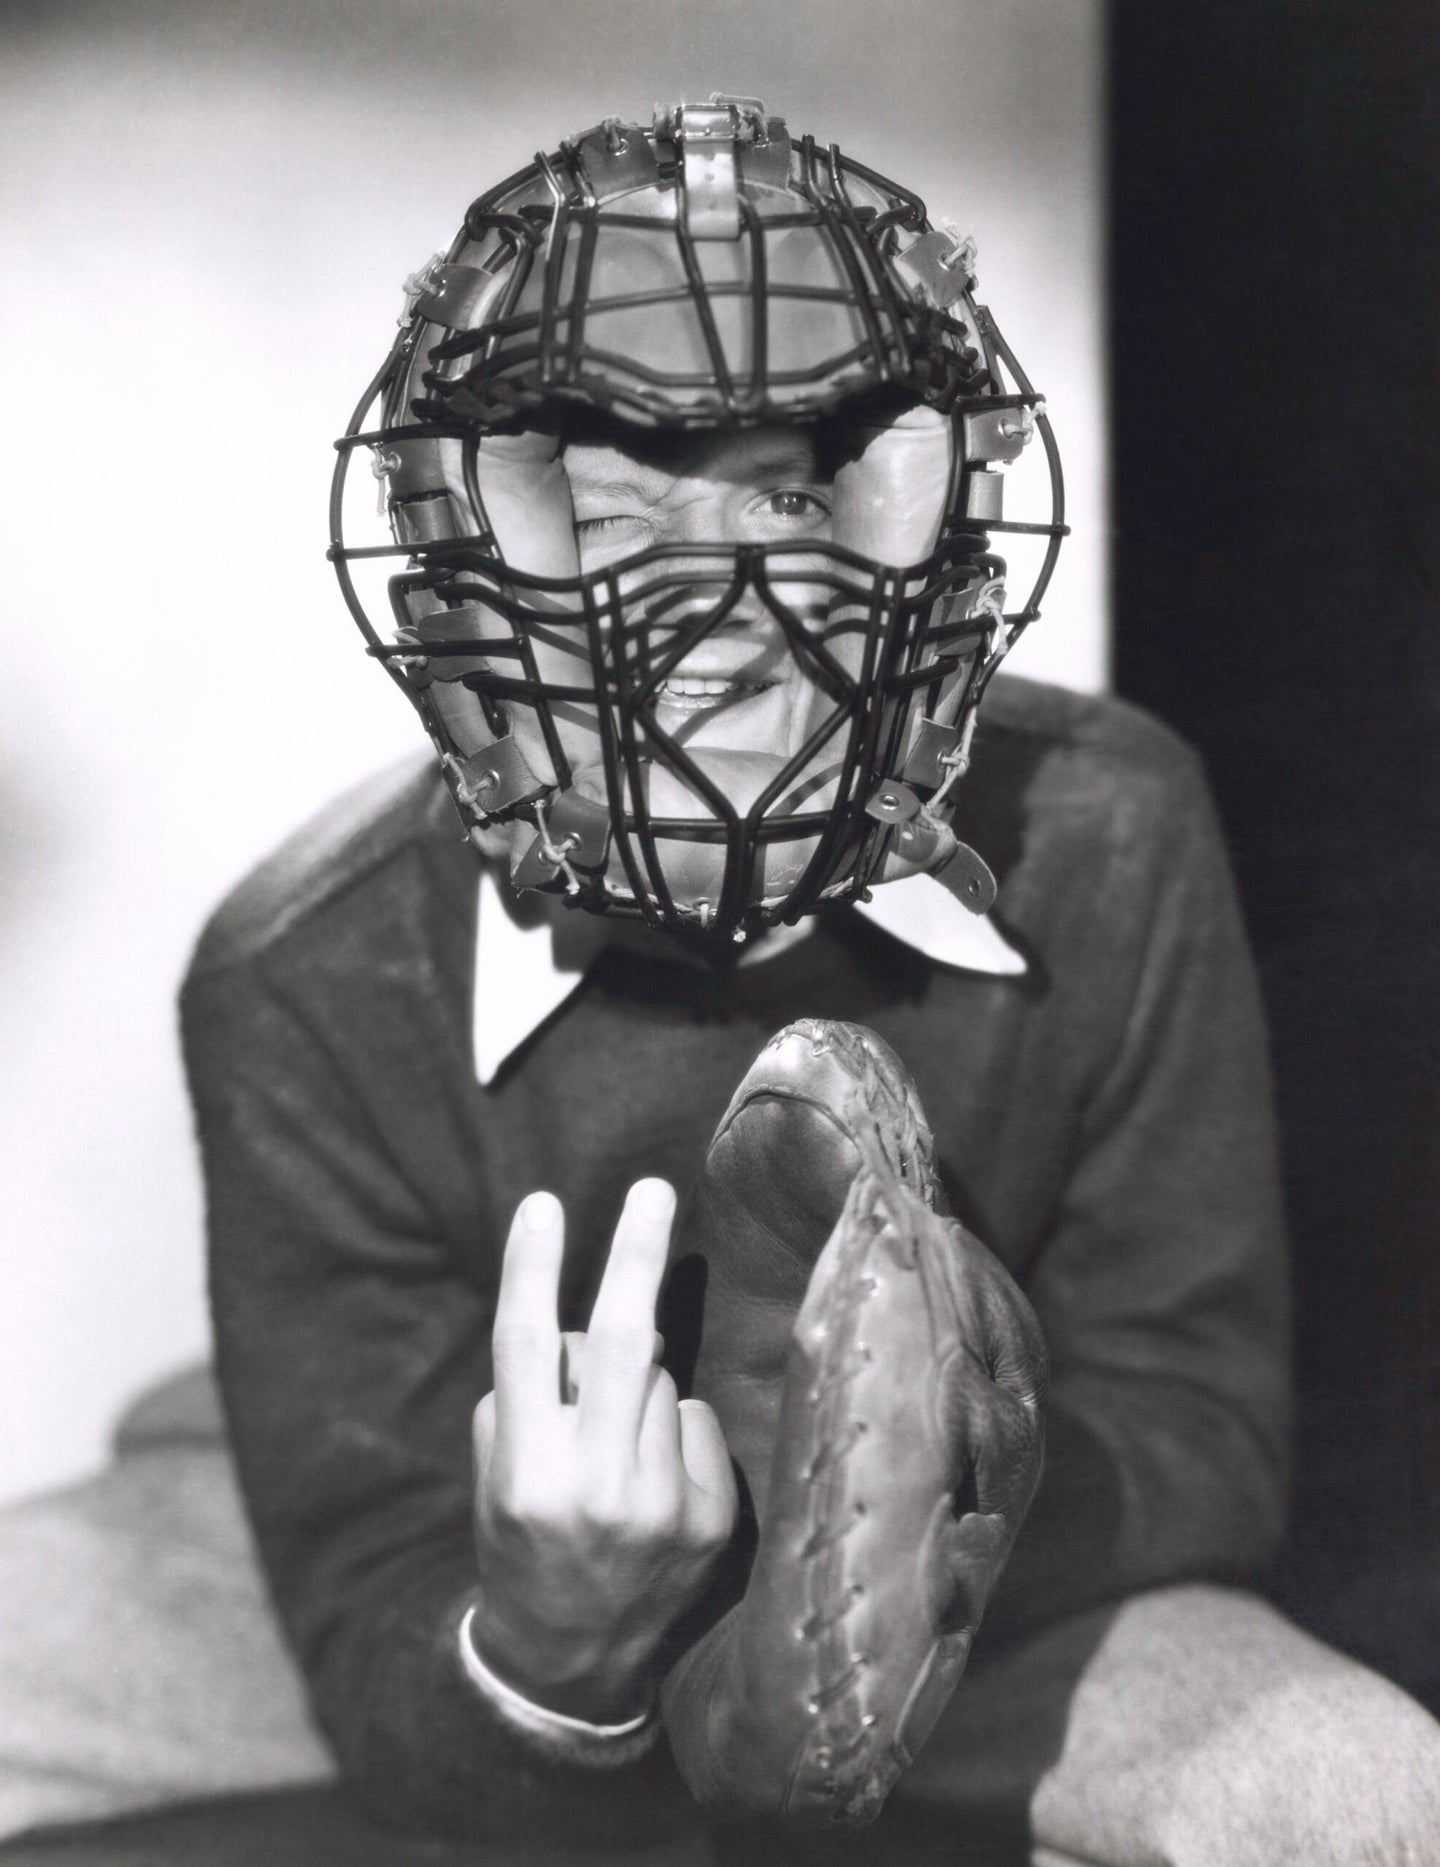 An old-school catcher throwing up a pitch sign